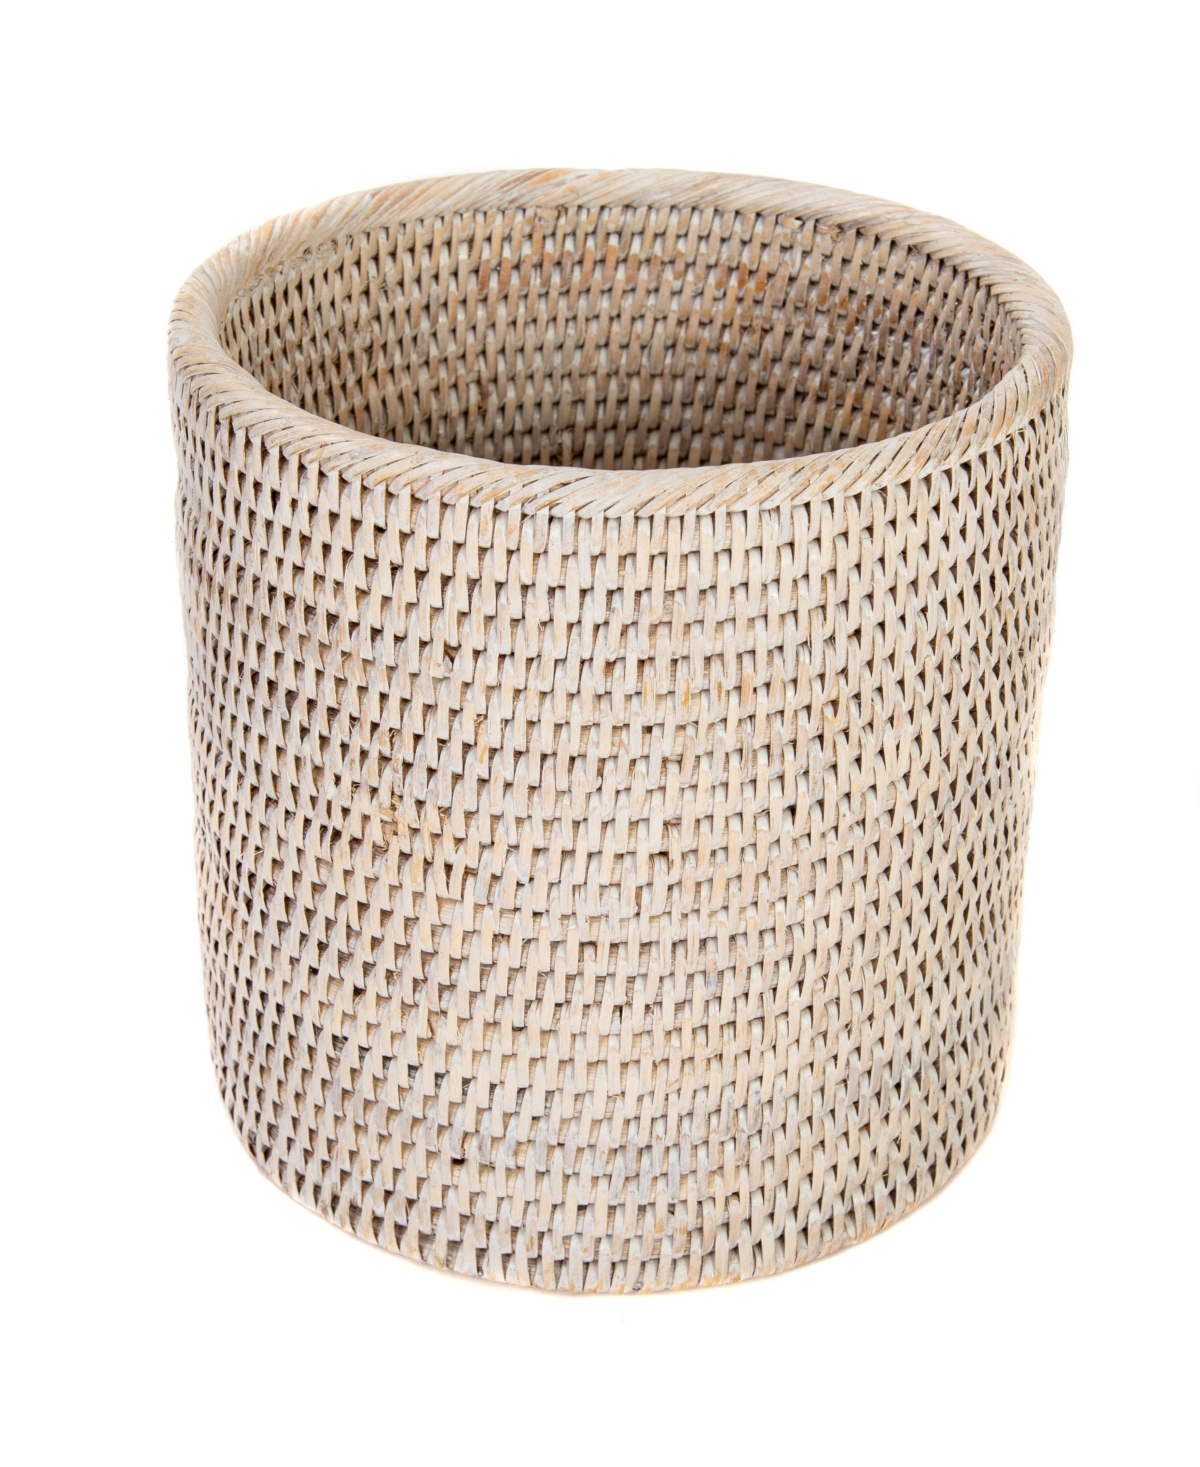 Shop Artifacts Trading Company Artifacts Rattan Round Waste Basket In Off-white